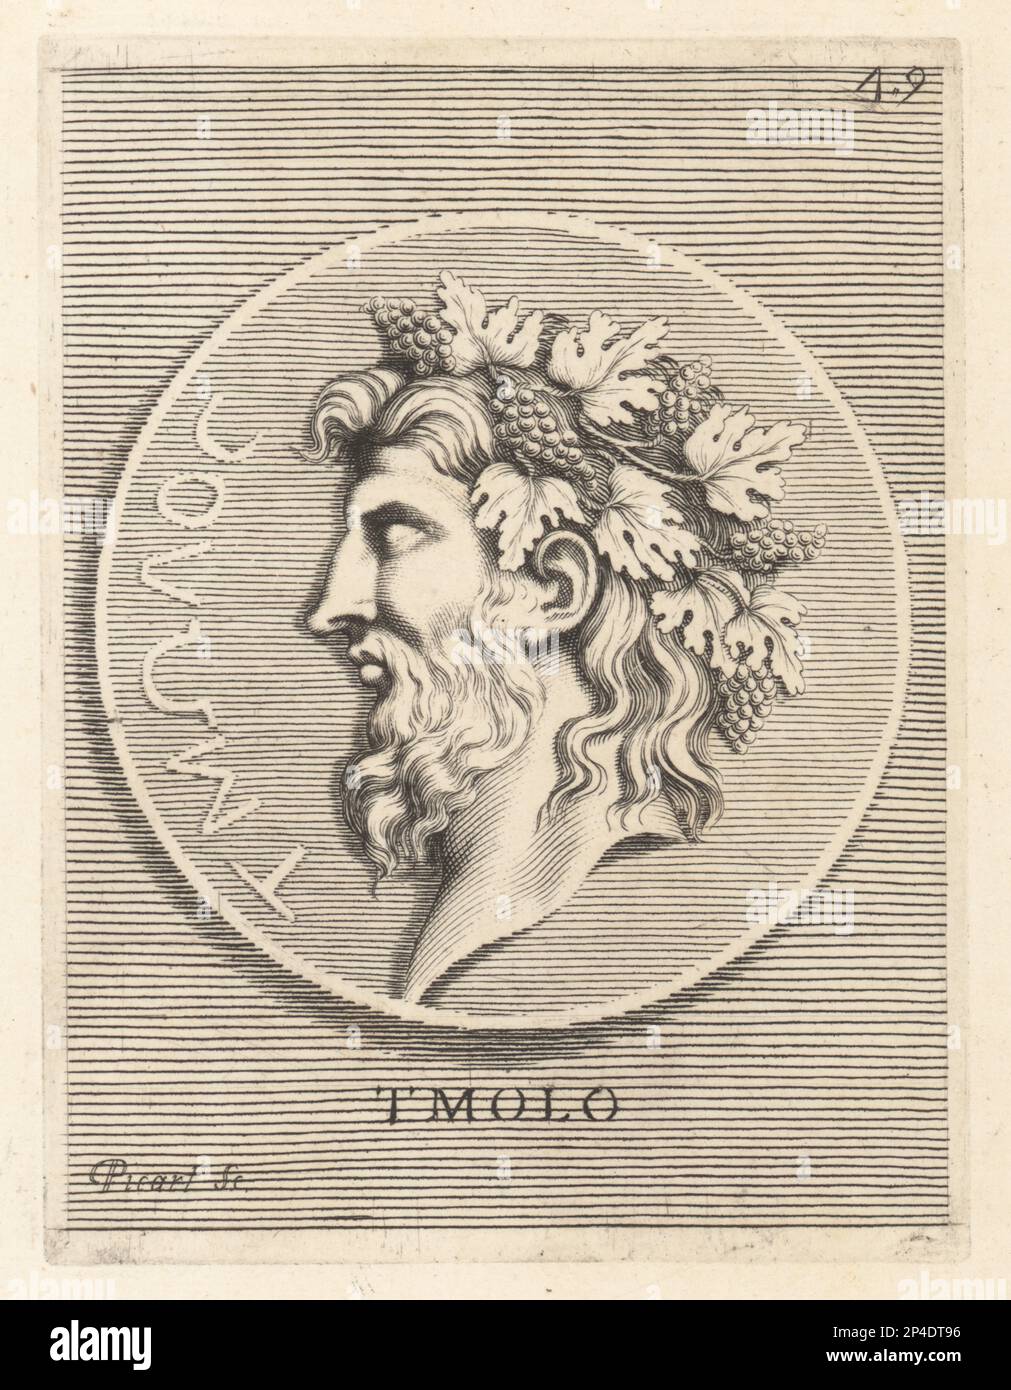 Tmolus, mythical Greek king of Lydia, husband of Omphale, and/or father of Tantalus. Bearded head crowned with vine leaves and grapes. From a coin owned by Cardinal Camillo Massimo. Tmolo. Copperplate engraving by Etienne Picart after Giovanni Angelo Canini from Iconografia, cioe disegni d'imagini de famosissimi monarchi, regi, filososi, poeti ed oratori dell' Antichita, Drawings of images of famous monarchs, kings, philosophers, poets and orators of Antiquity, Ignatio de’Lazari, Rome, 1699. Stock Photo